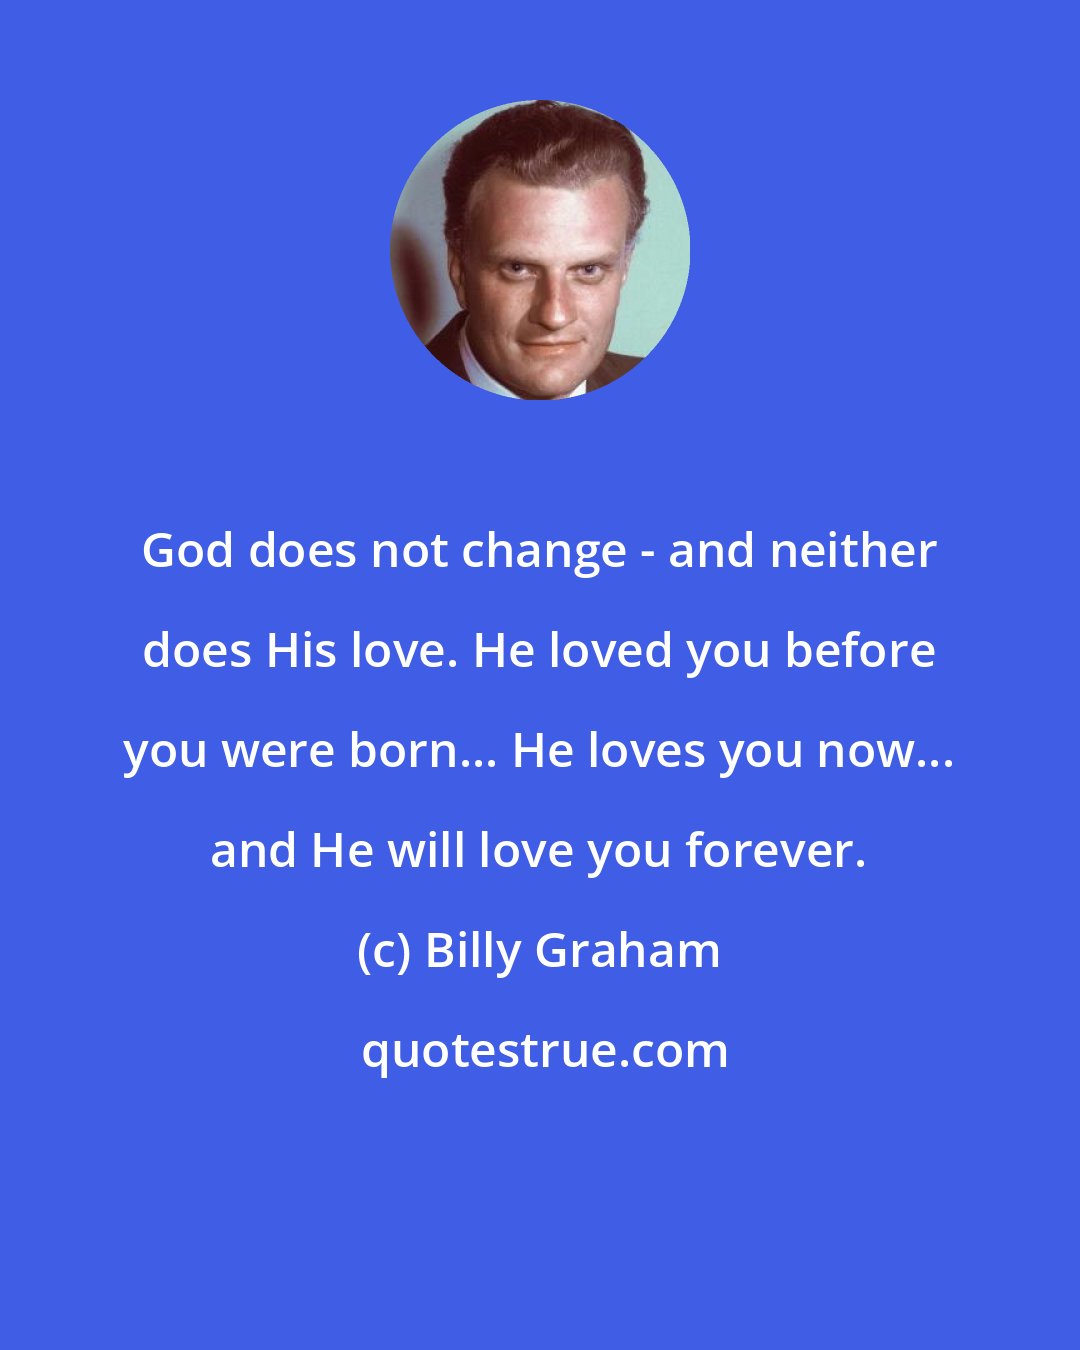 Billy Graham: God does not change - and neither does His love. He loved you before you were born... He loves you now... and He will love you forever.